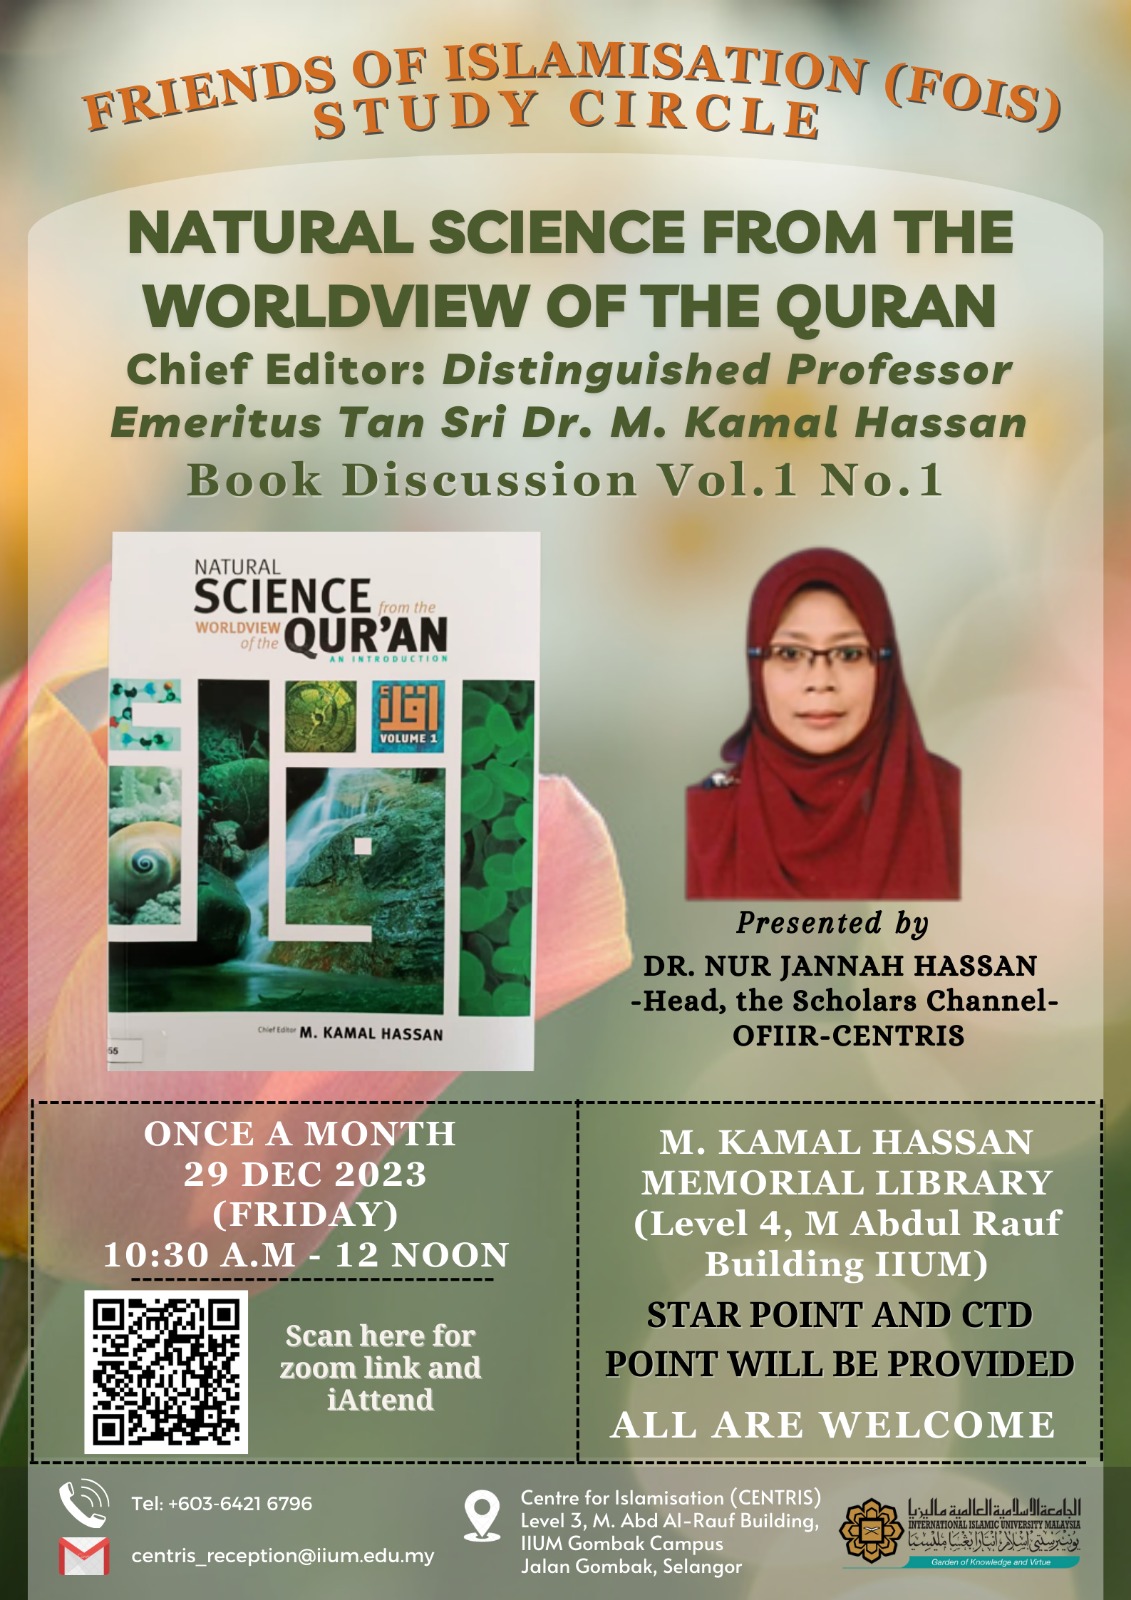 NATURAL SCIENCE FROM THE WORDVIEW OF THE QURAN